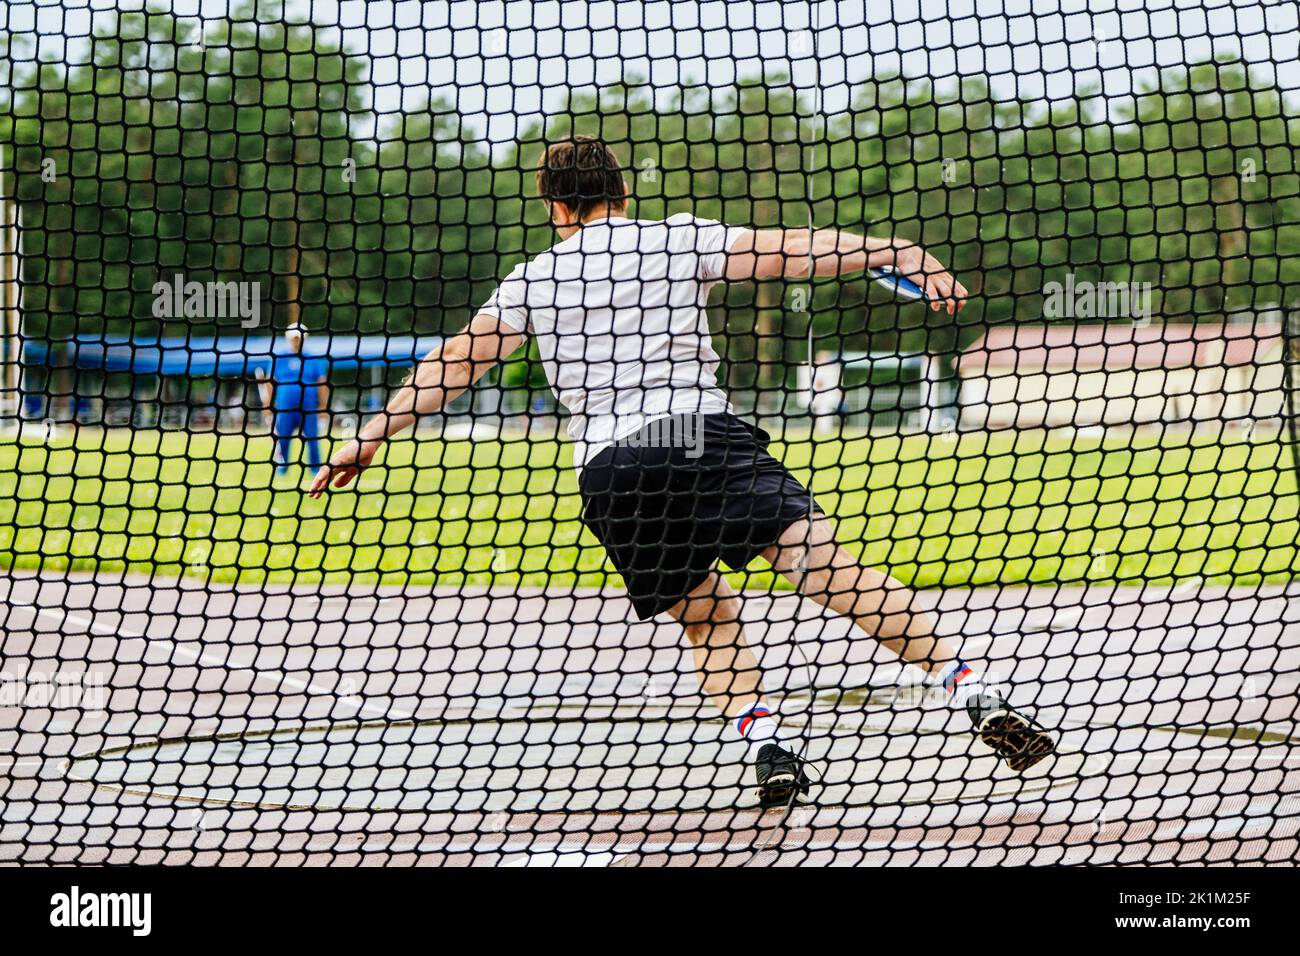 male athlete attempt in discus throwing Stock Photo